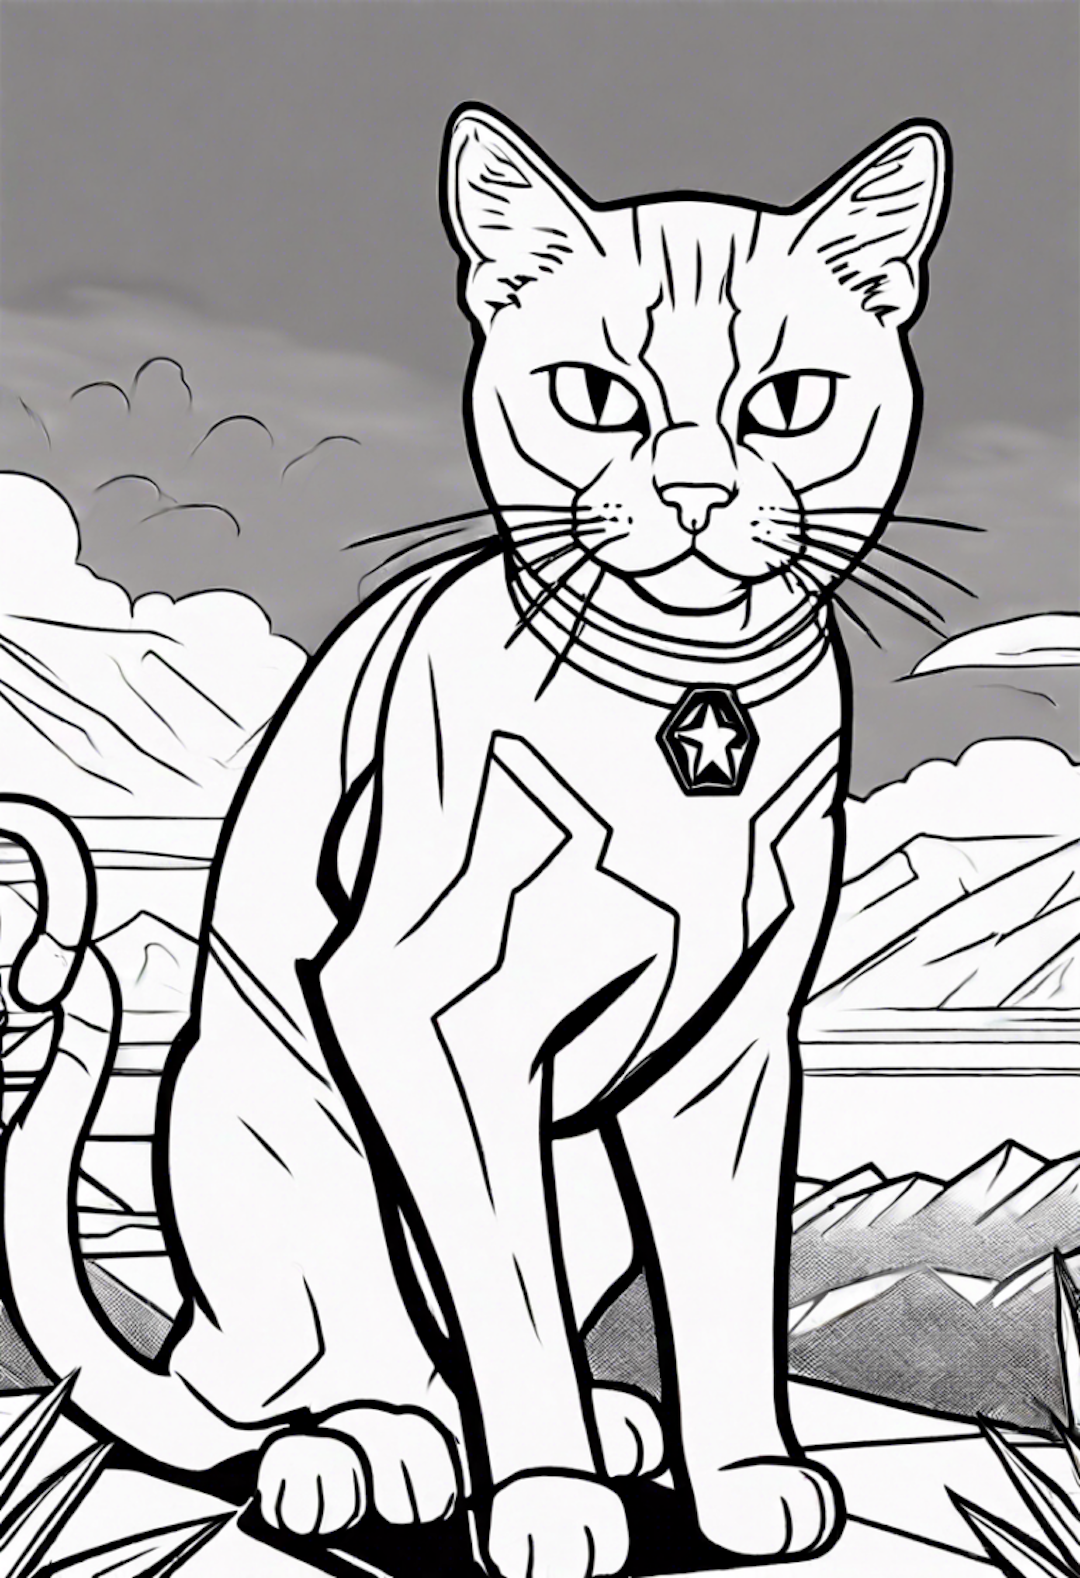 Captain Marvel Cat coloring pages